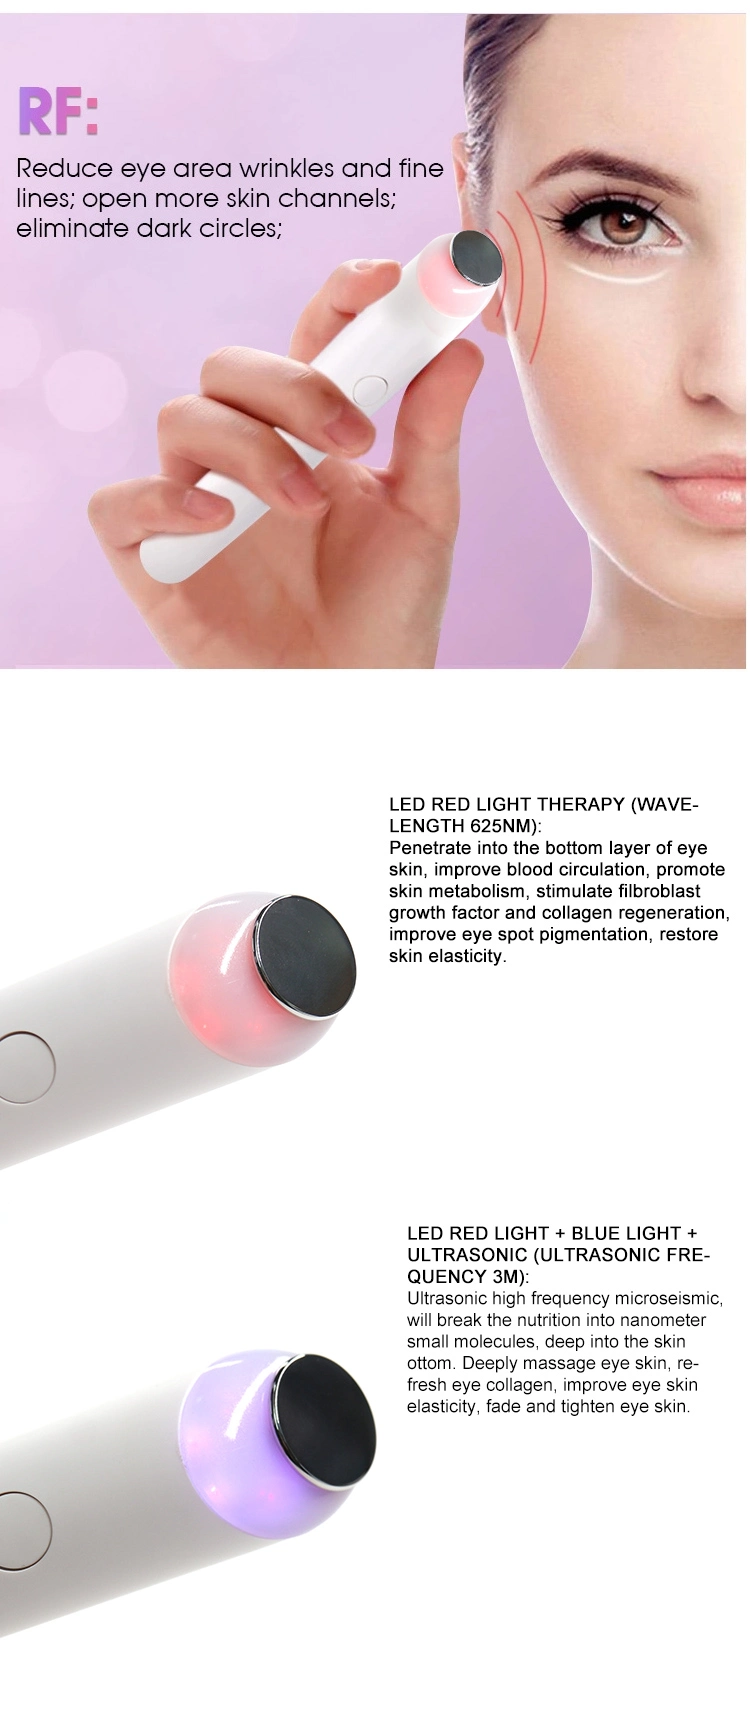 Anti Wrinkle Eye Care Massager for Relieves Dark Circles and Puffiness Eye